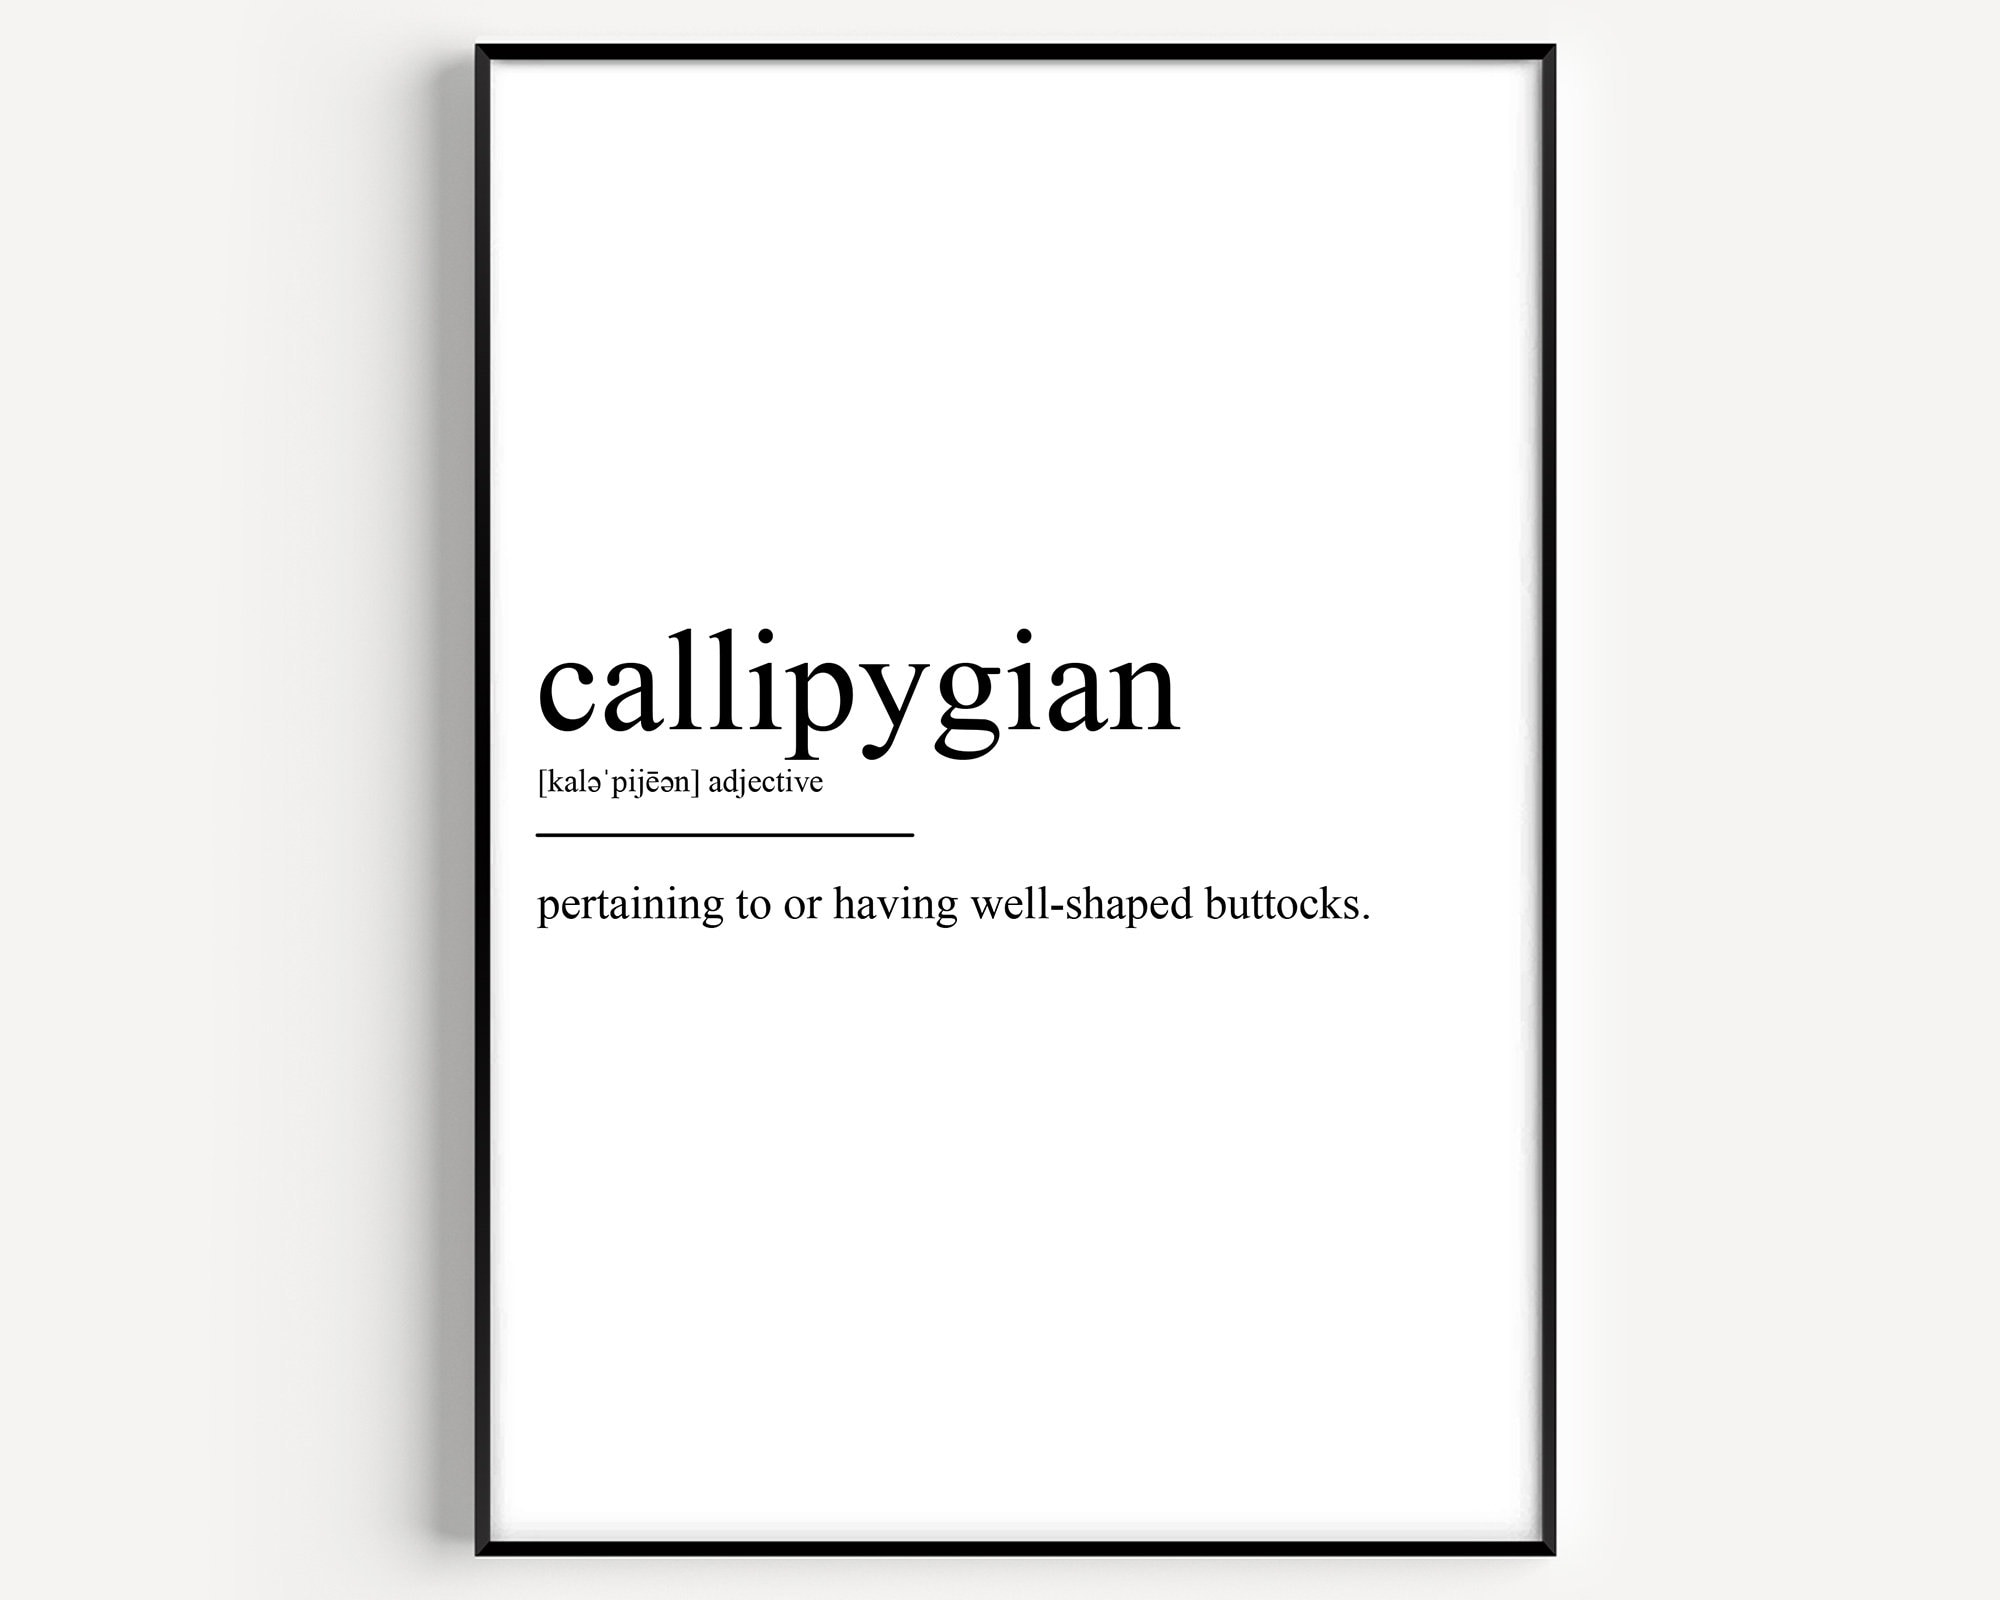 🍑 Learn English Words - CALLIPYGIAN - Meaning, Vocabulary with